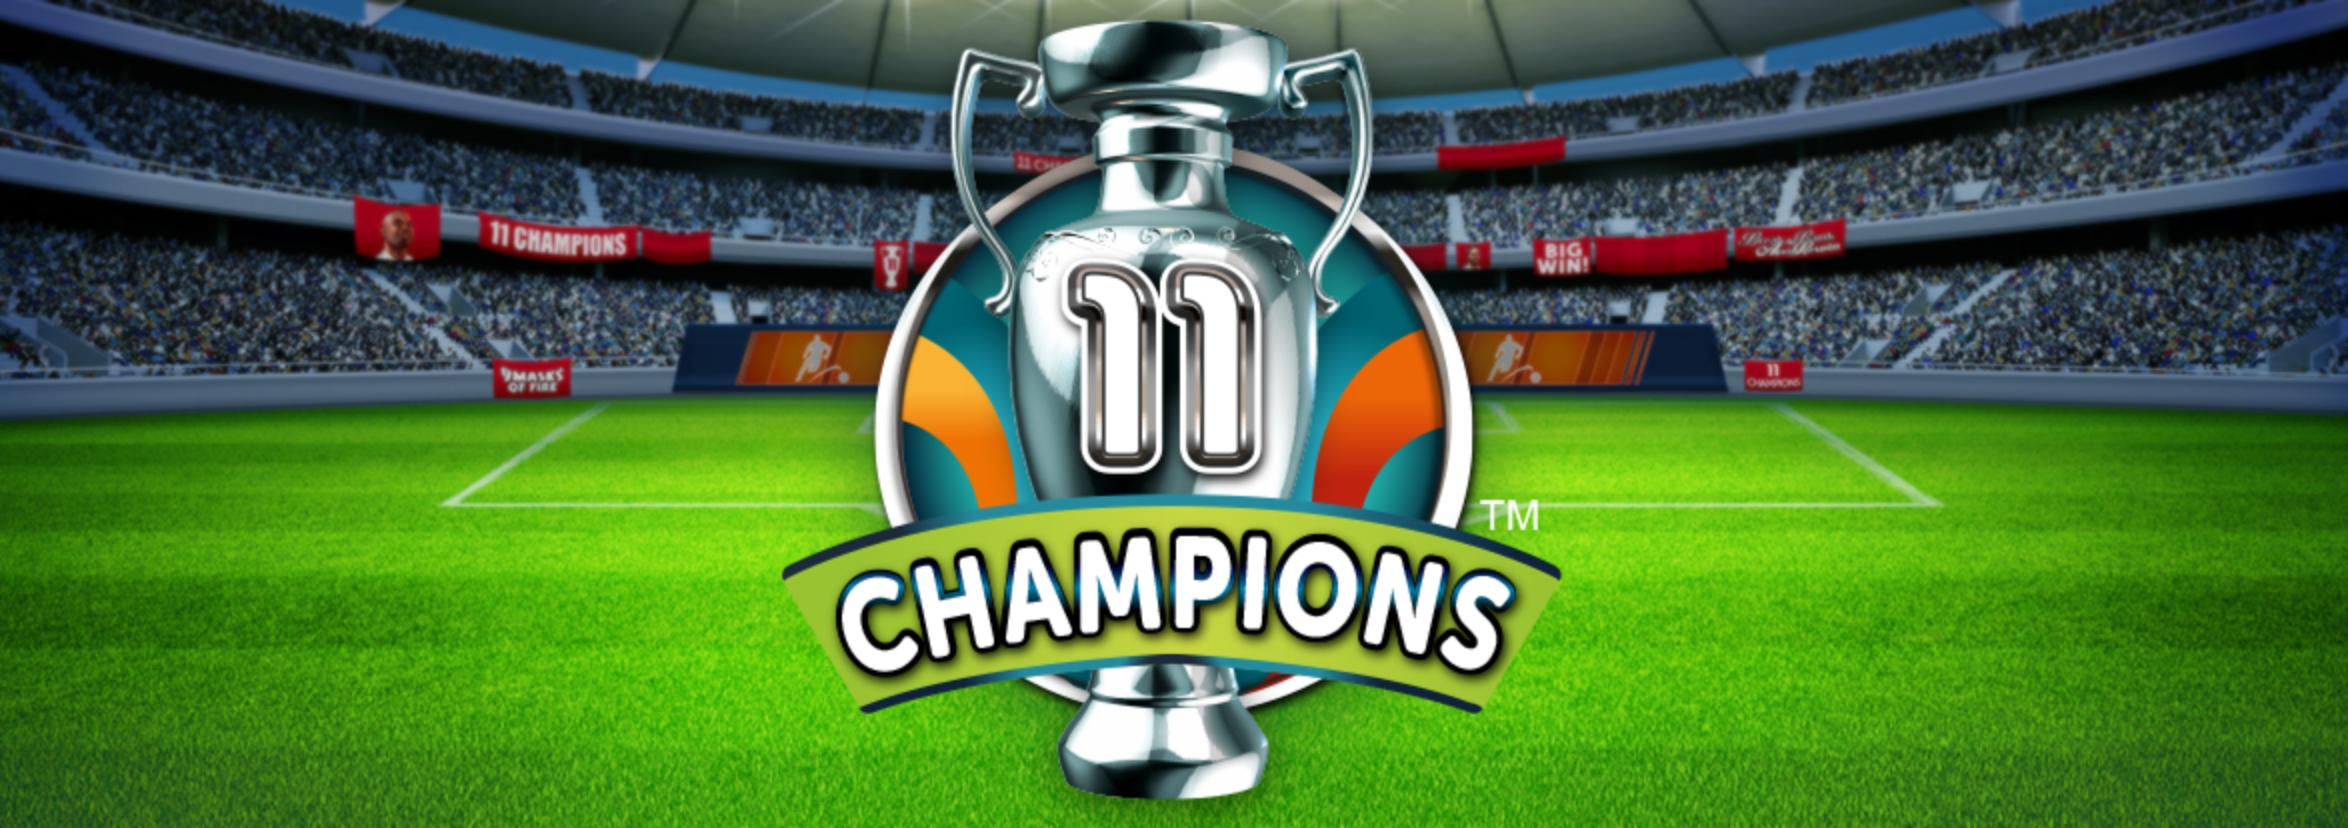 The 11 Champions Online Slot Demo Game by Gameburger Studios